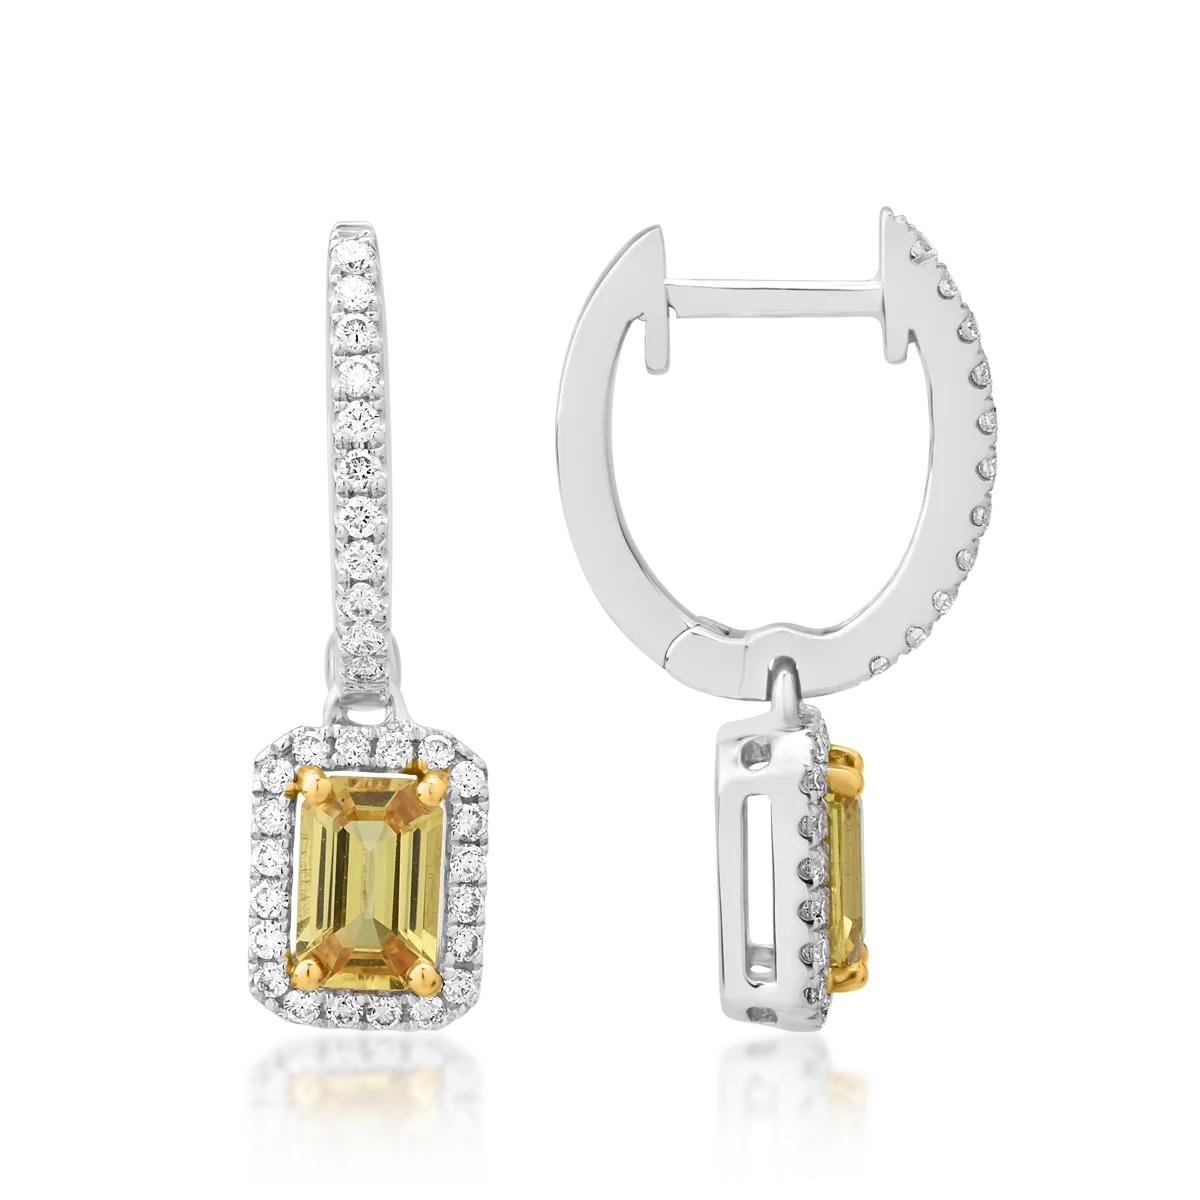 18K white gold earrings with 1.26ct yellow sapphire and 0.37ct diamond